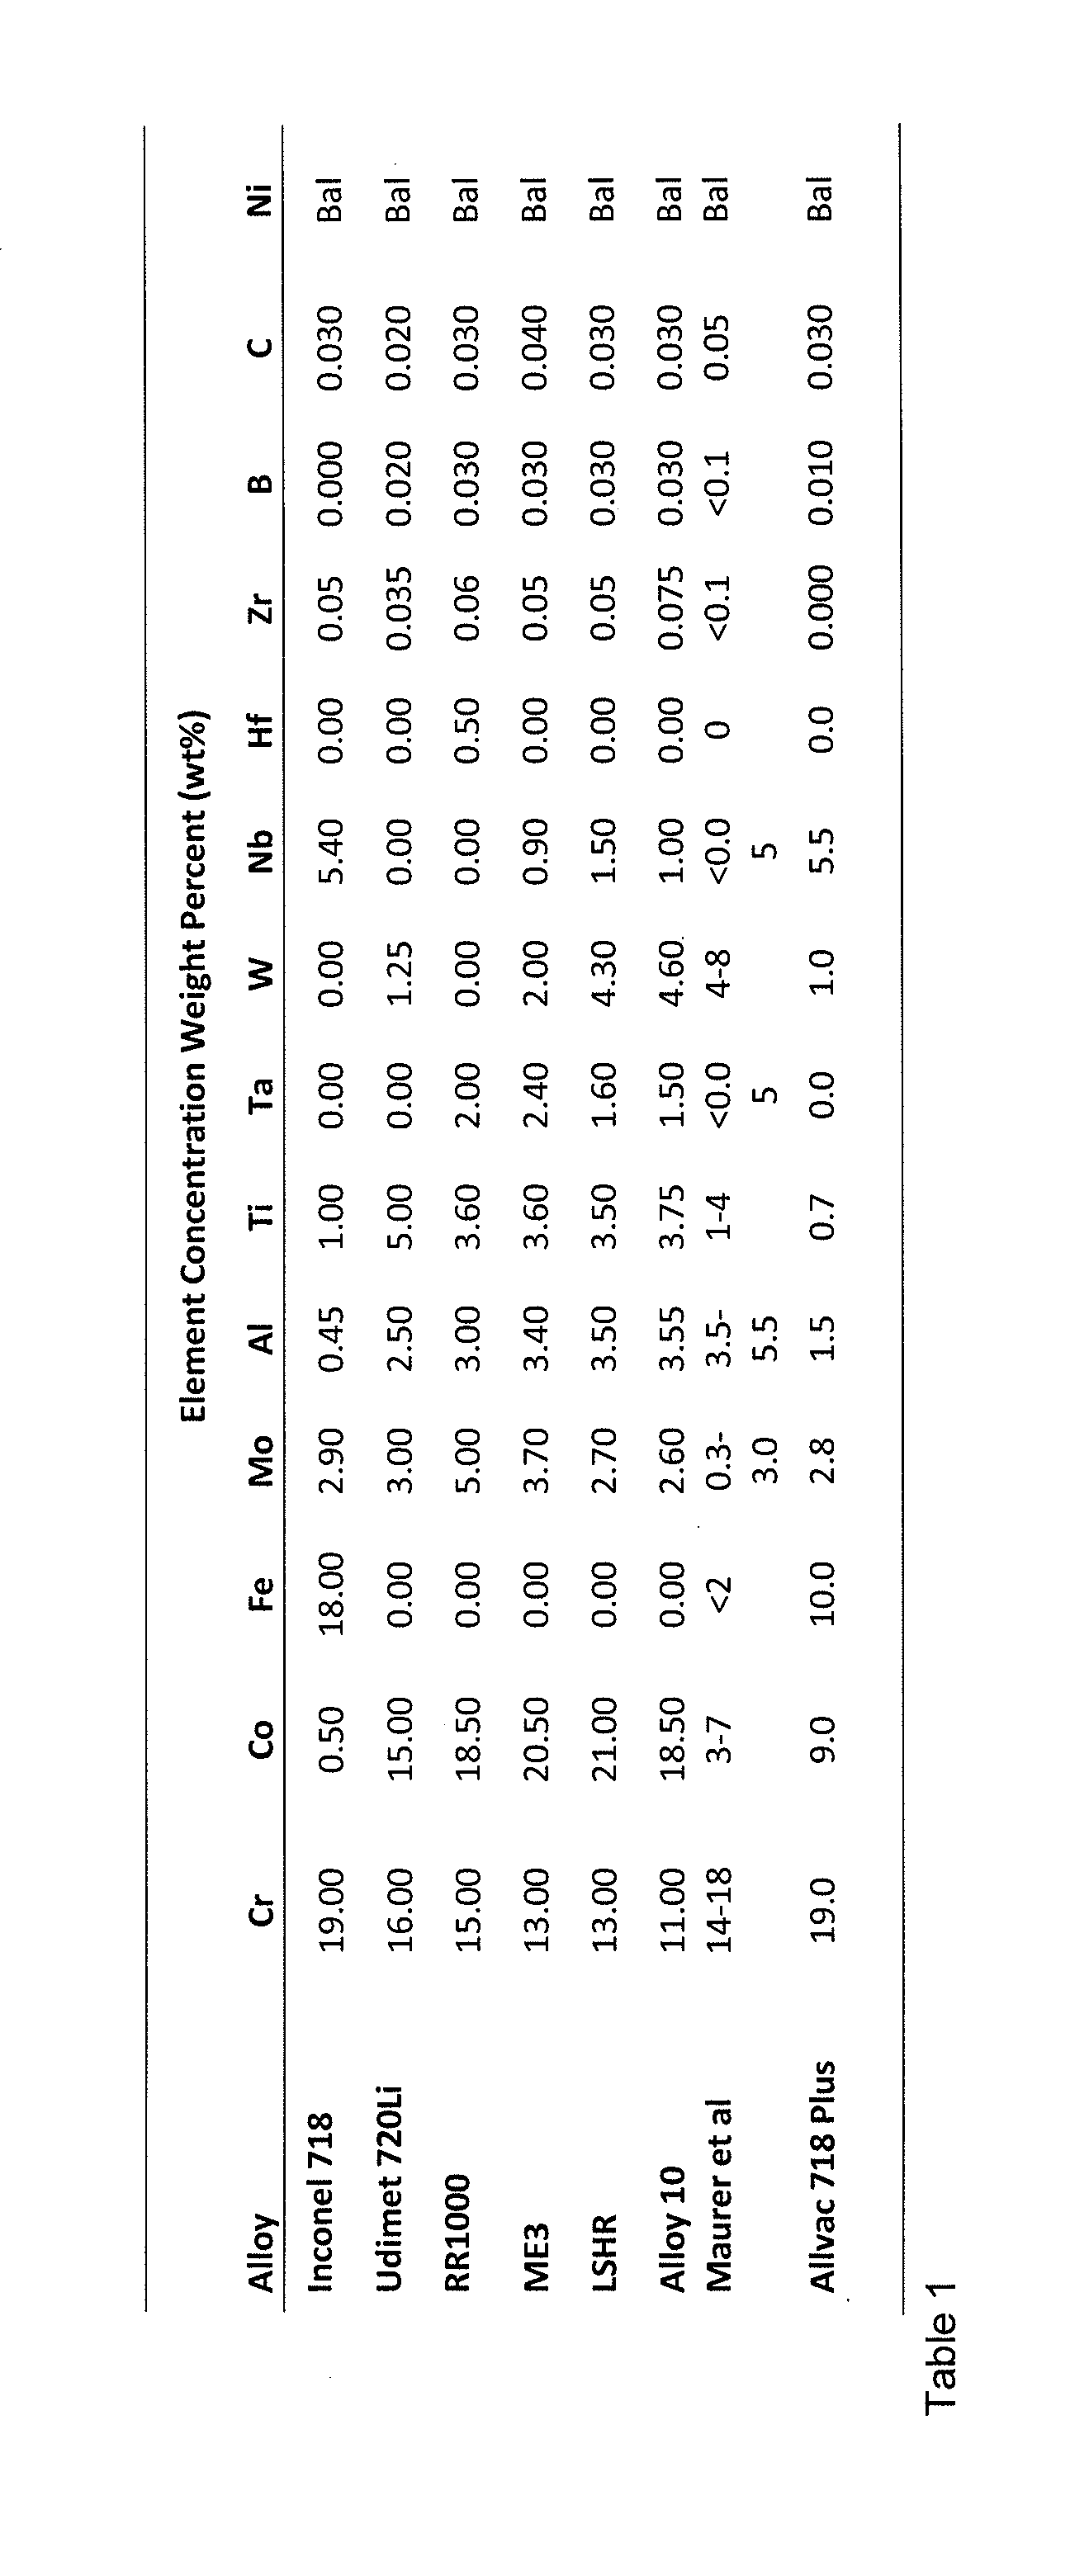 Nickel based alloy composition